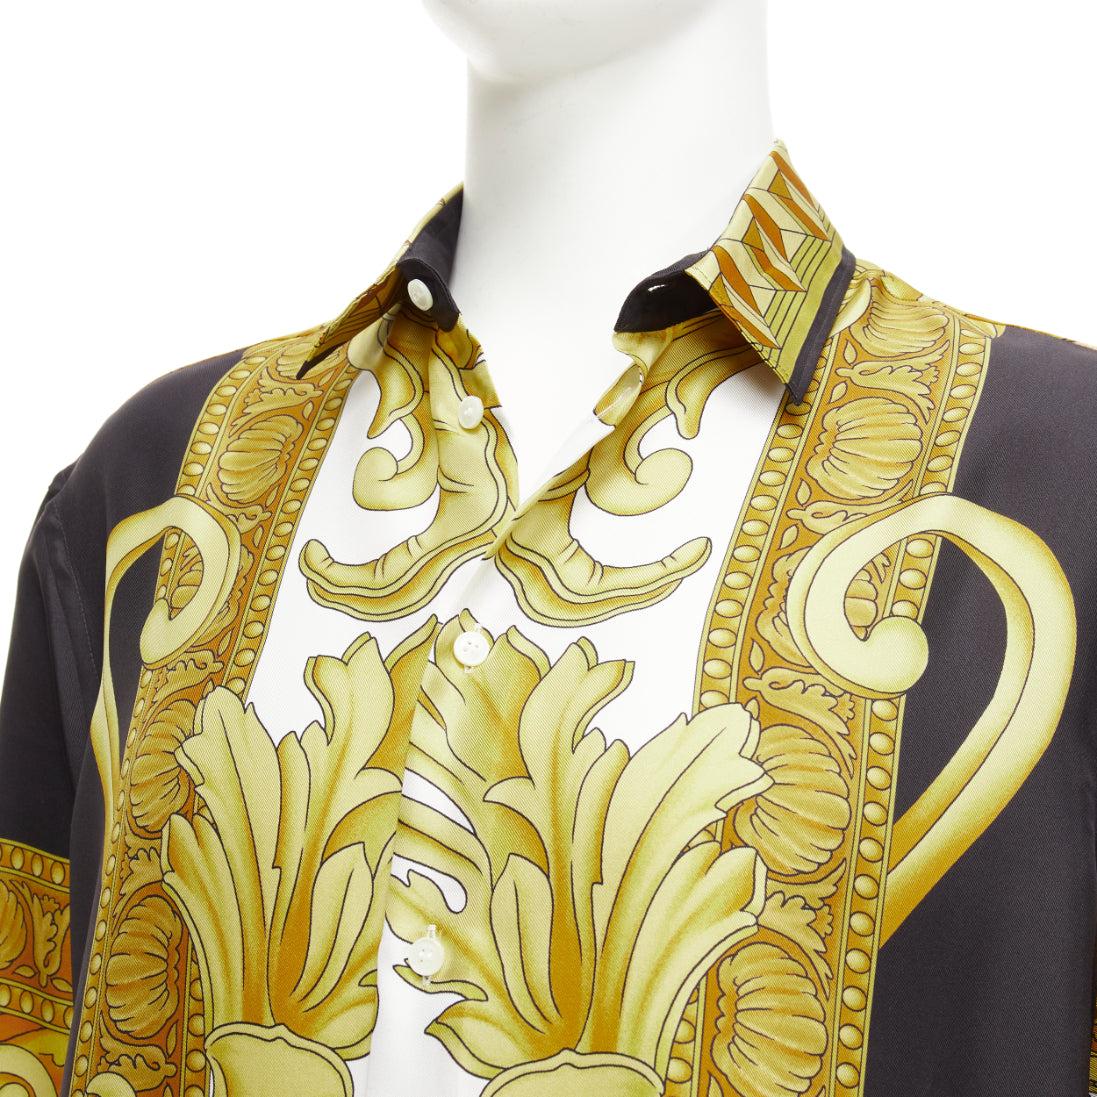 VERSACE 100% silk Renaissance Barocco gold black white print shirt IT52 XL
Reference: TGAS/D01065
Brand: Versace
Designer: Donatella Versace
Collection: 2023
Material: Silk
Color: Gold, Black
Pattern: Barocco
Closure: Button
Made in: